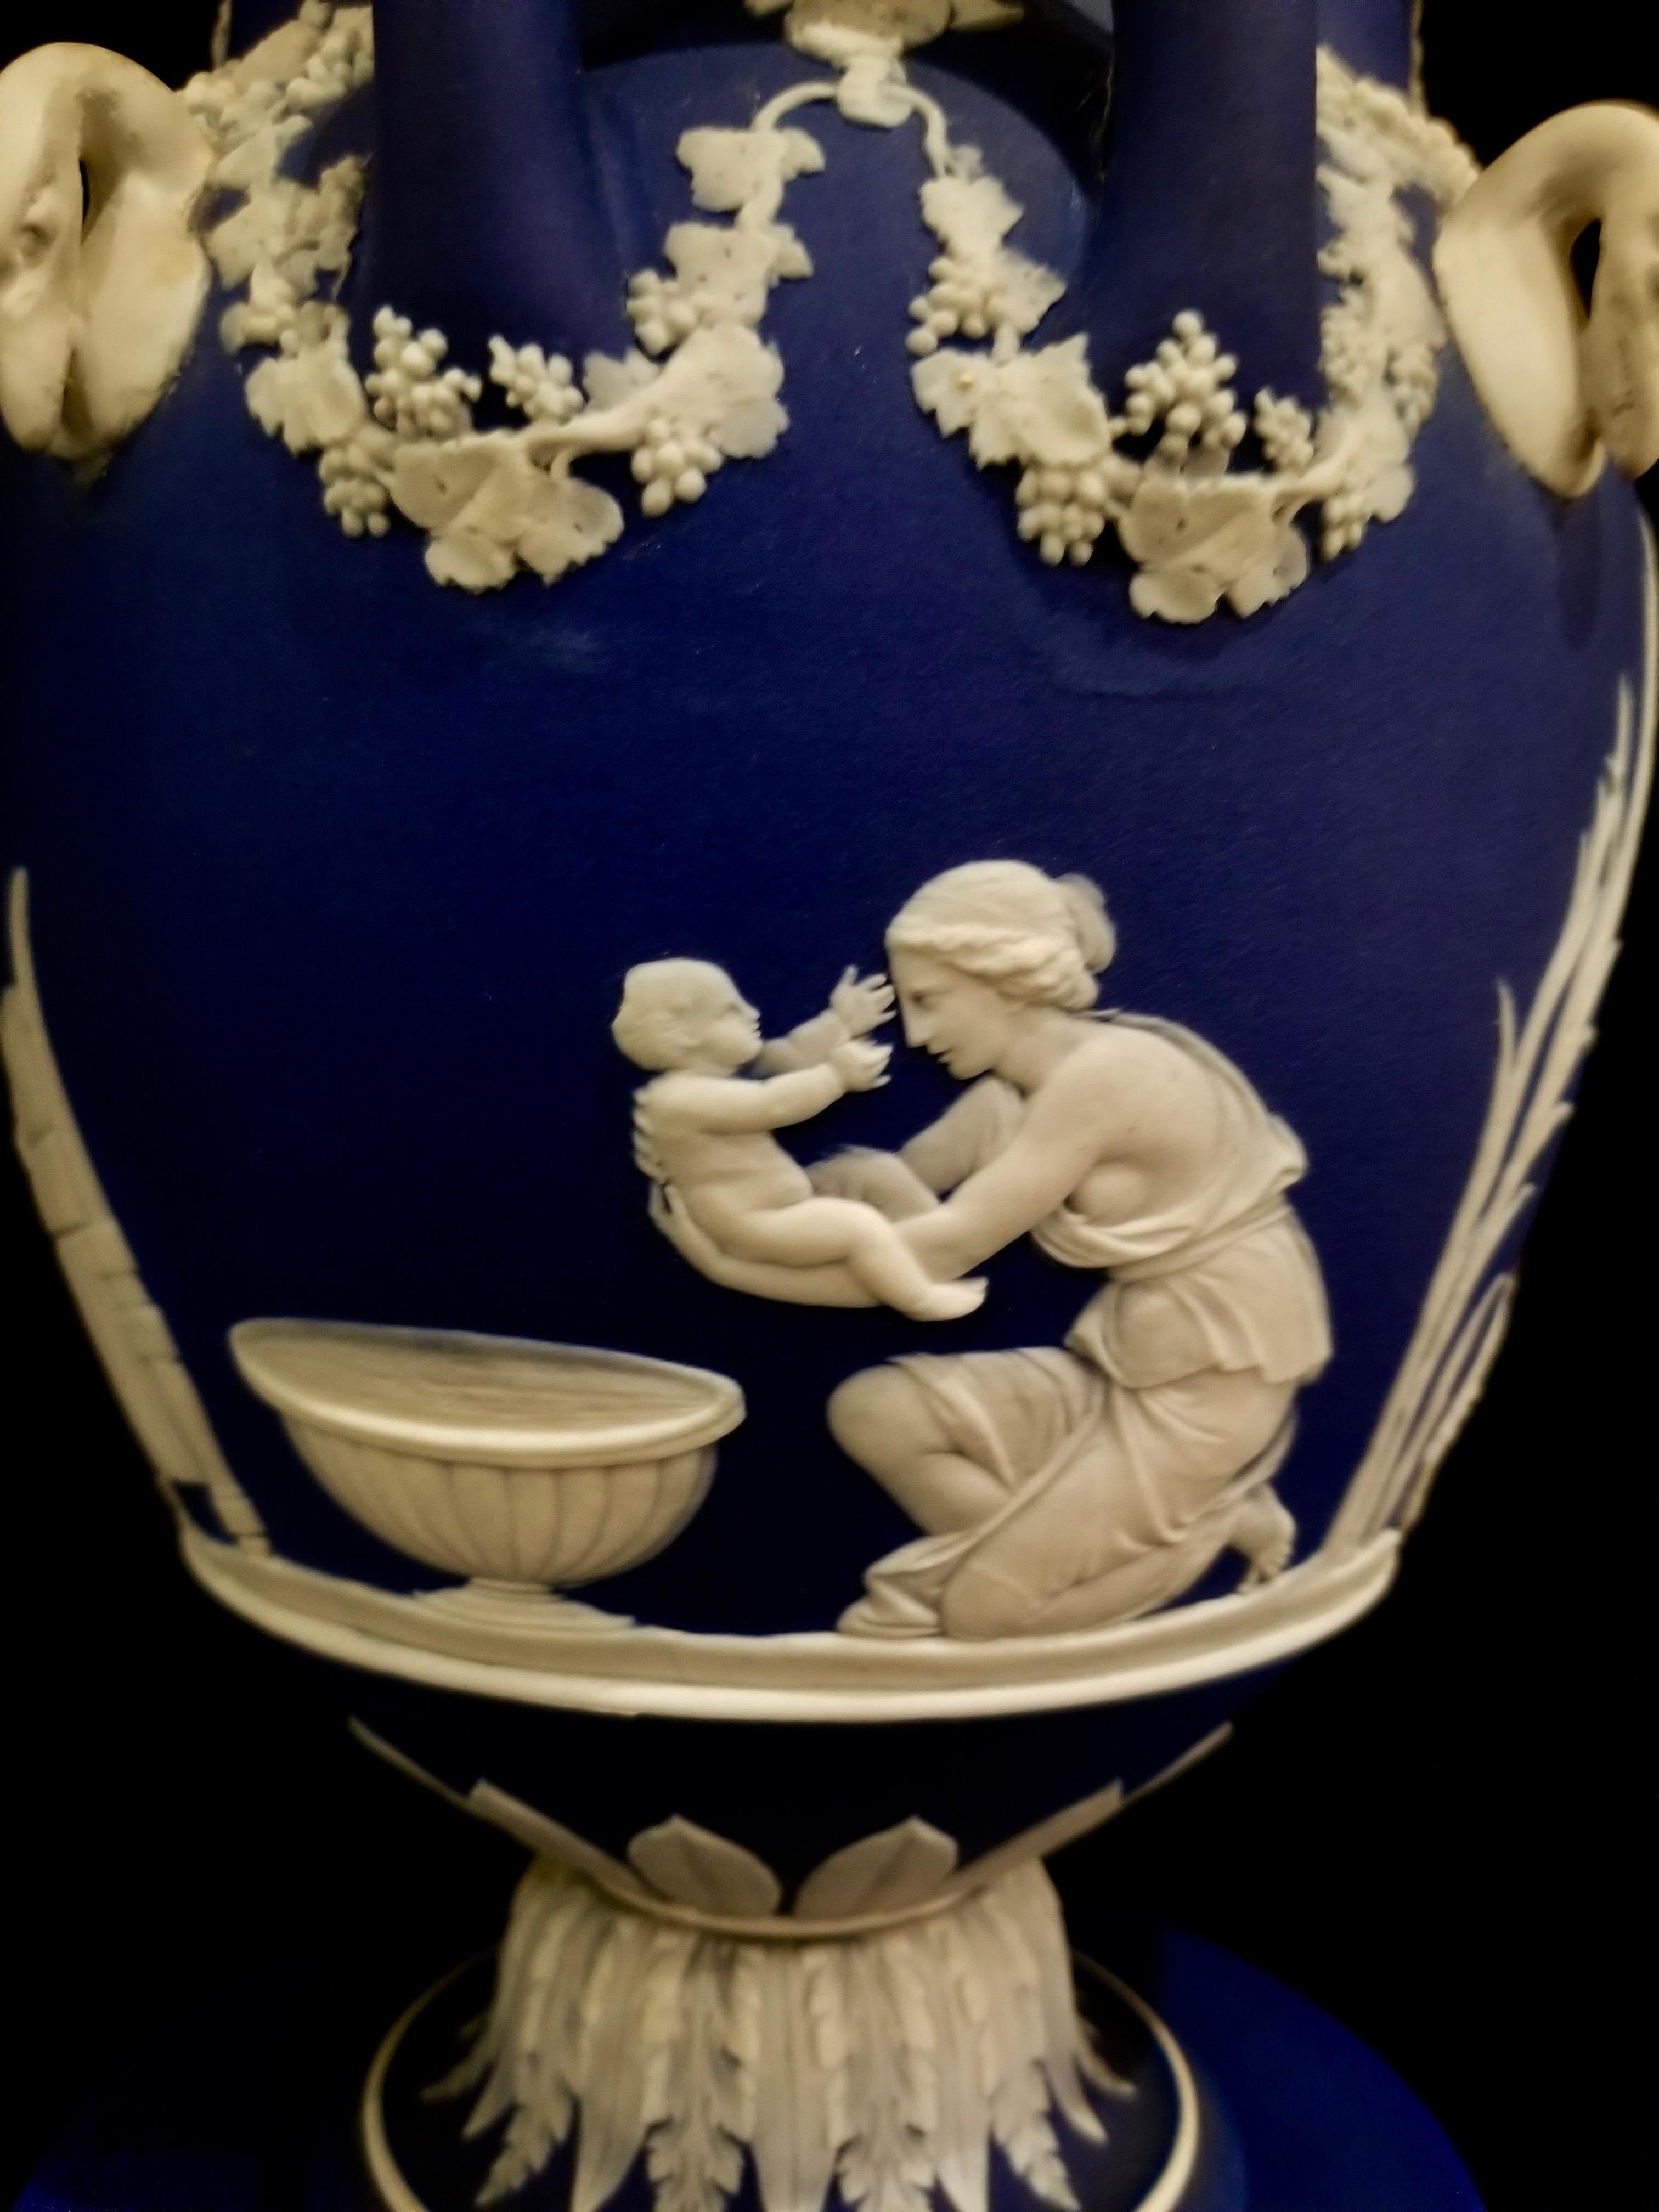 Hand-Carved English Jasperware Blue Wedgwood Vases w/ Neoclassical Subjects on Plinths, Pair For Sale